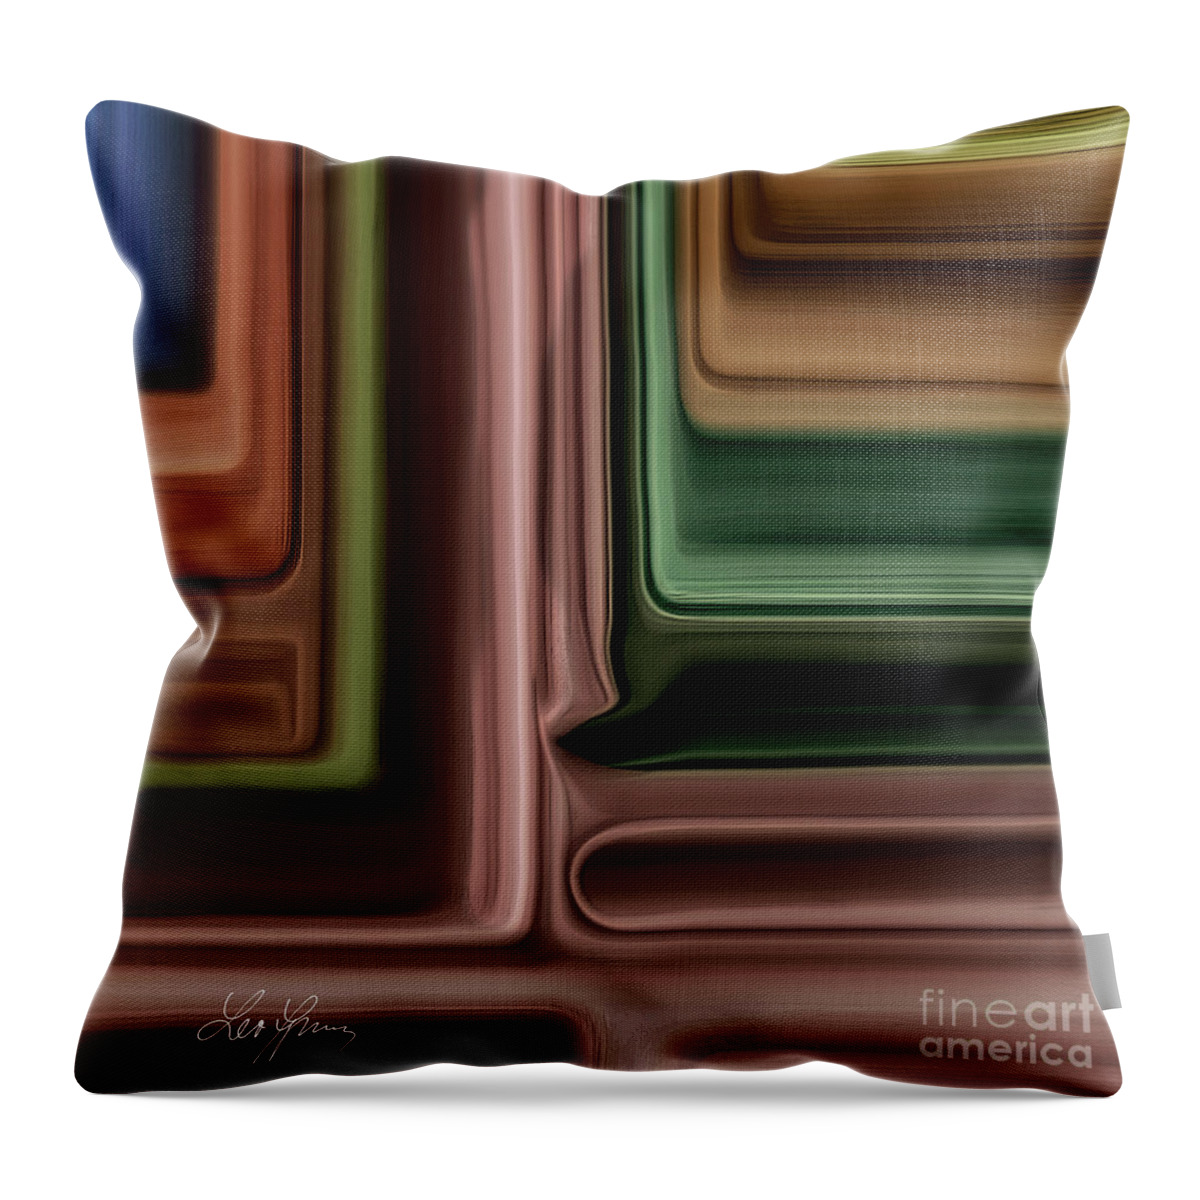 Archive Throw Pillow featuring the digital art In The Archive by Leo Symon